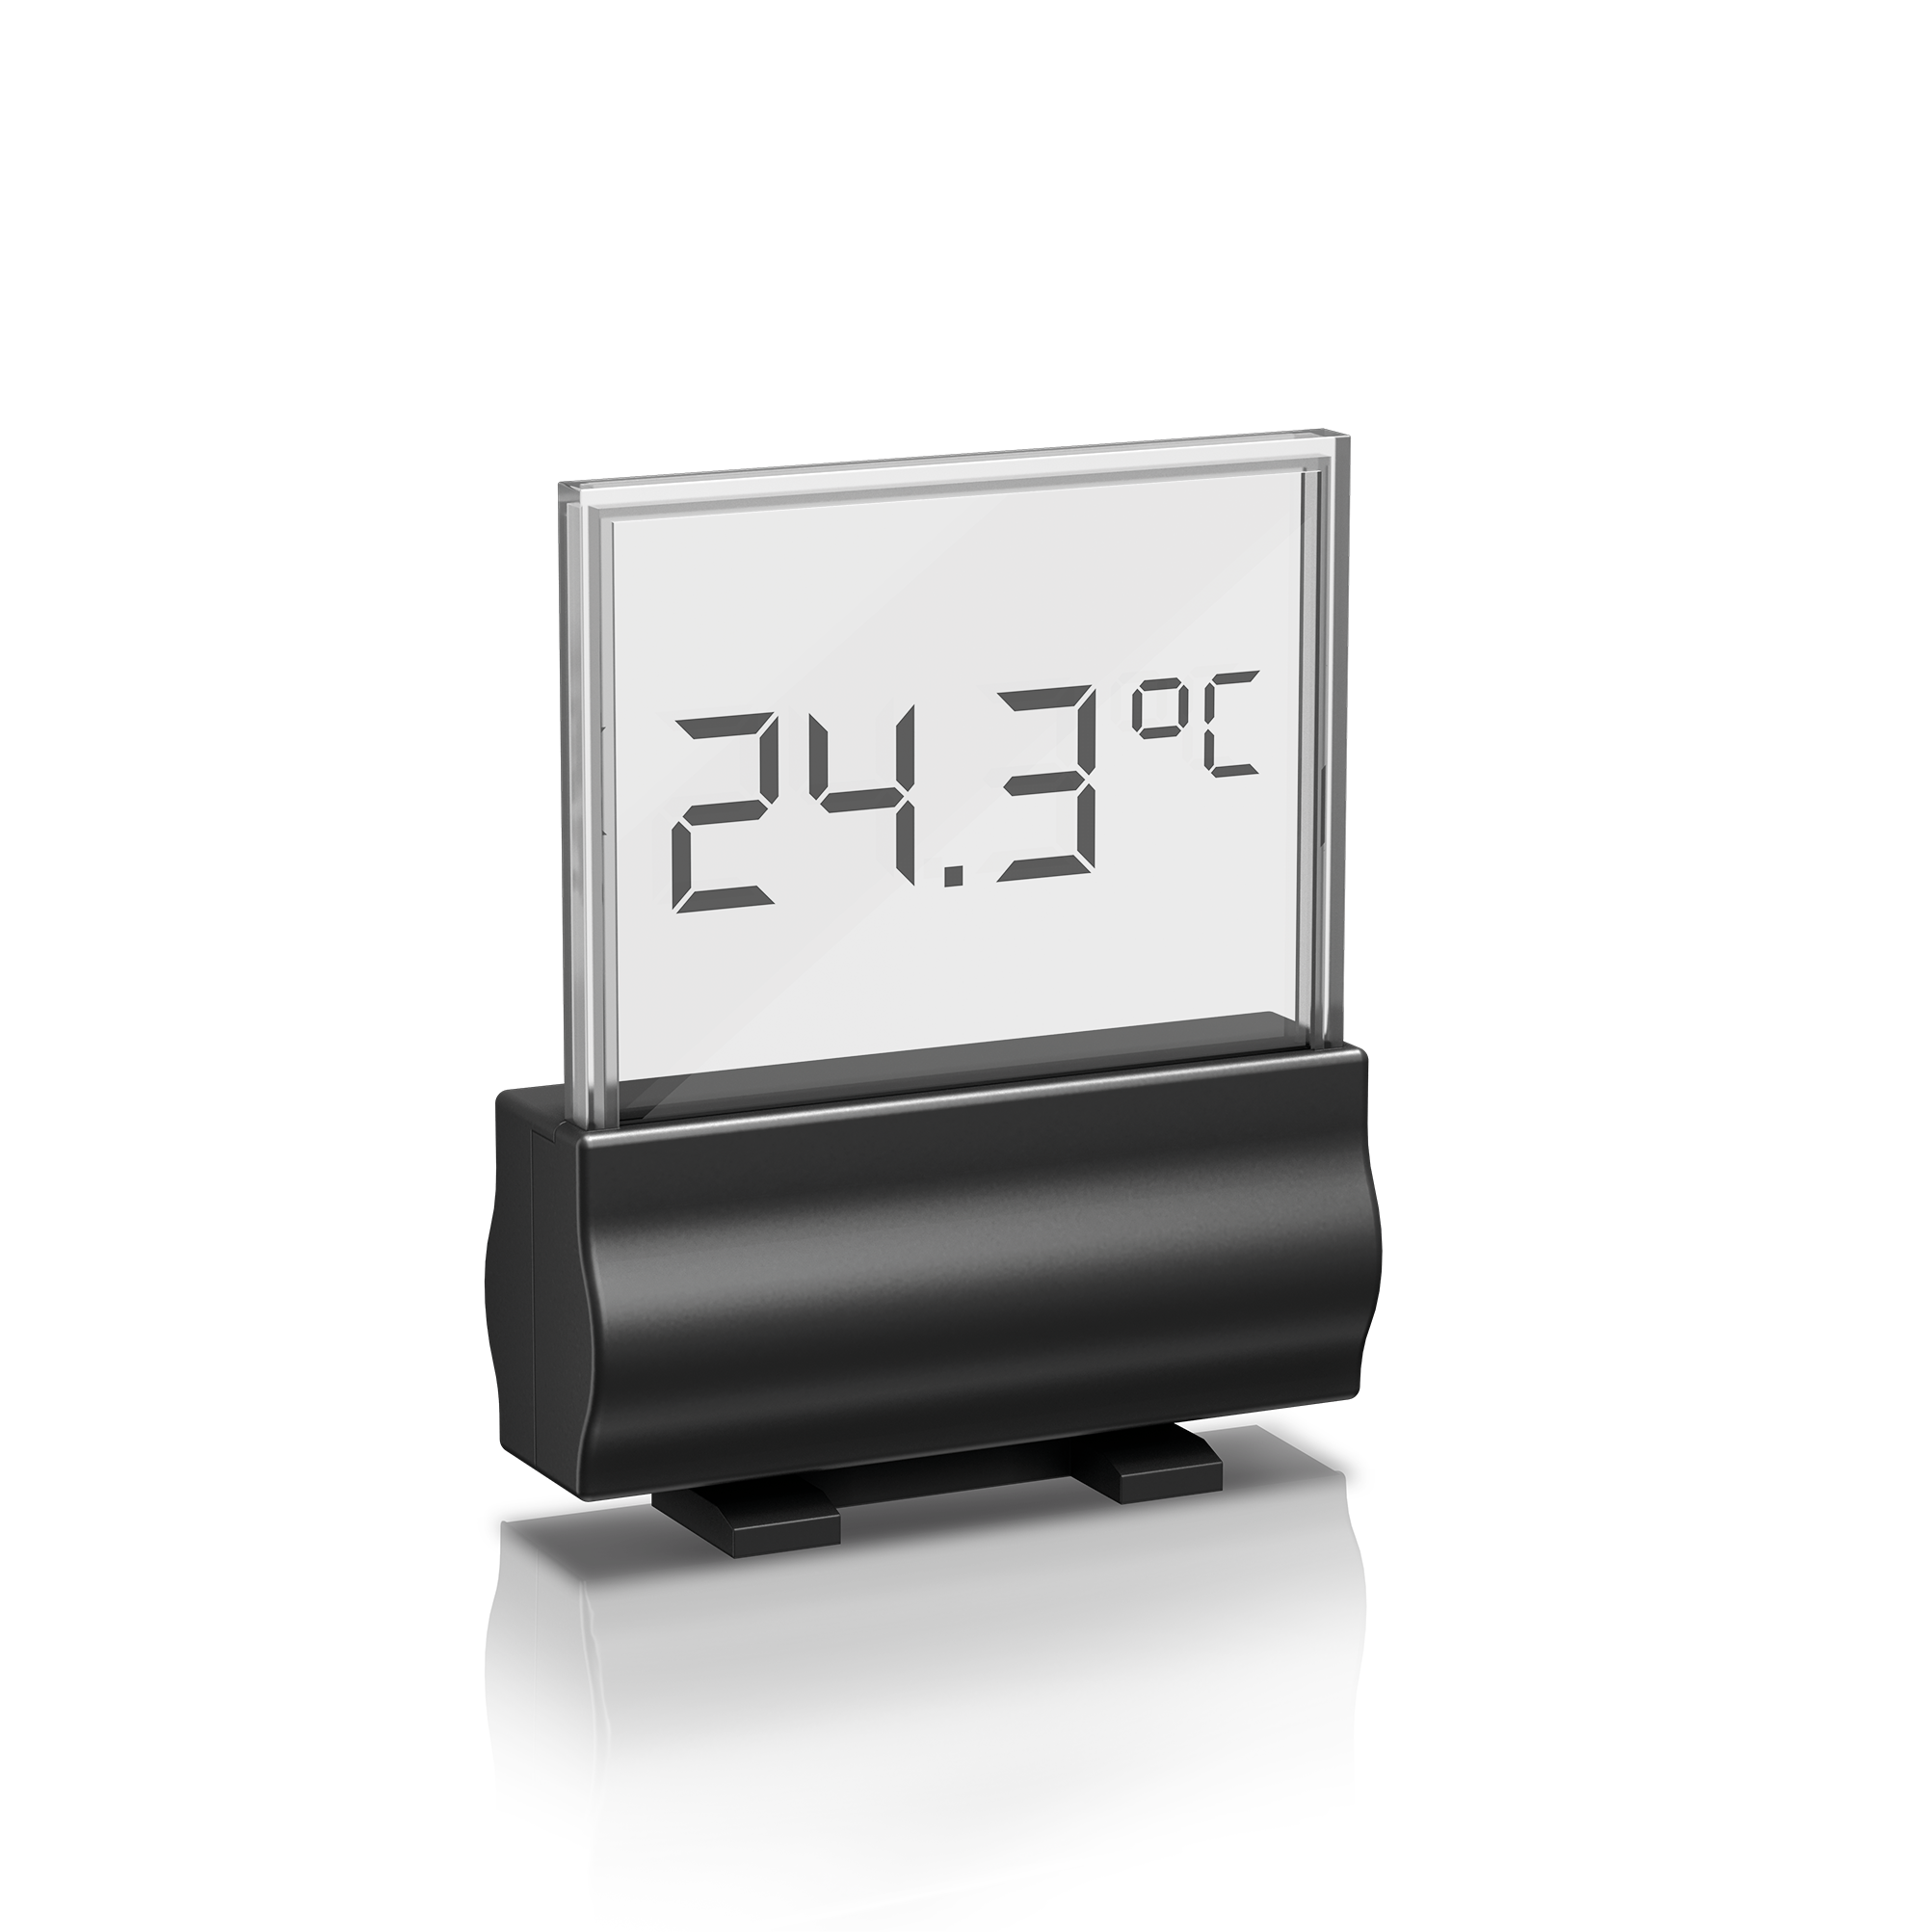 Digital Thermometer 3.0